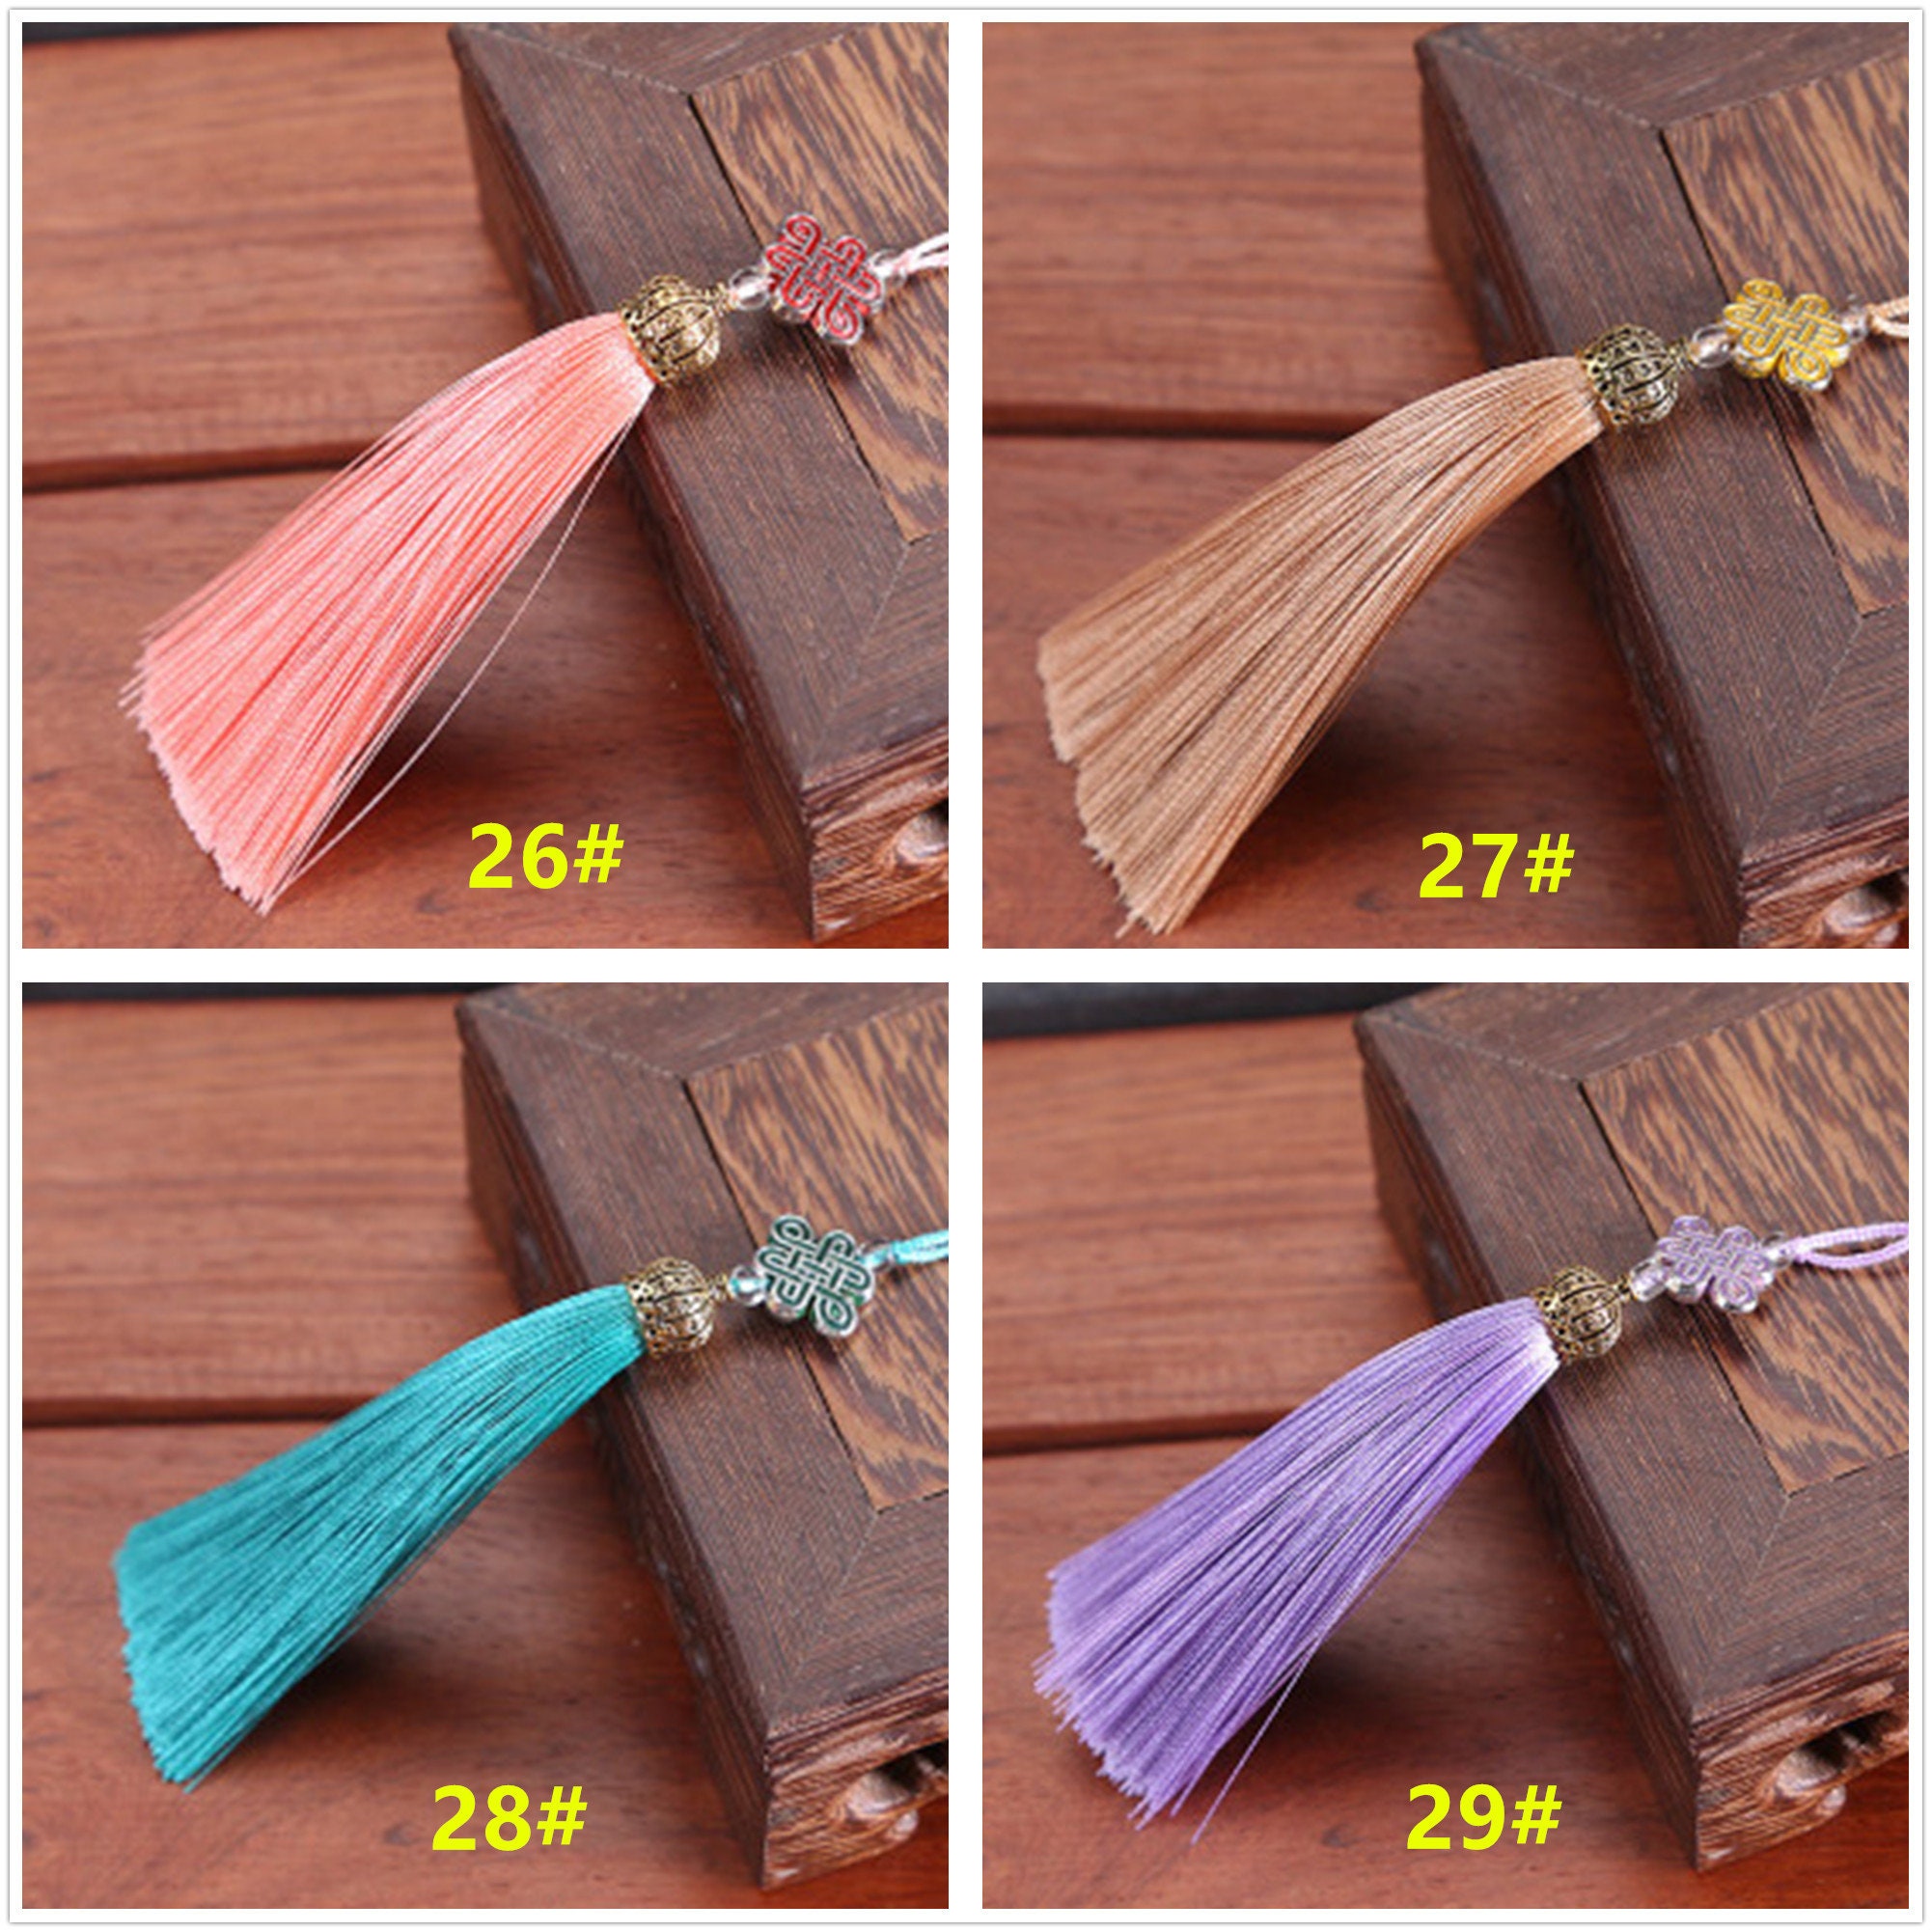 Silk Craft Tassels for Jewelry Making Different Color Decorative Key Chains  Tassel Trim Fringe With Gold Cap by the Pack, TSL-01 